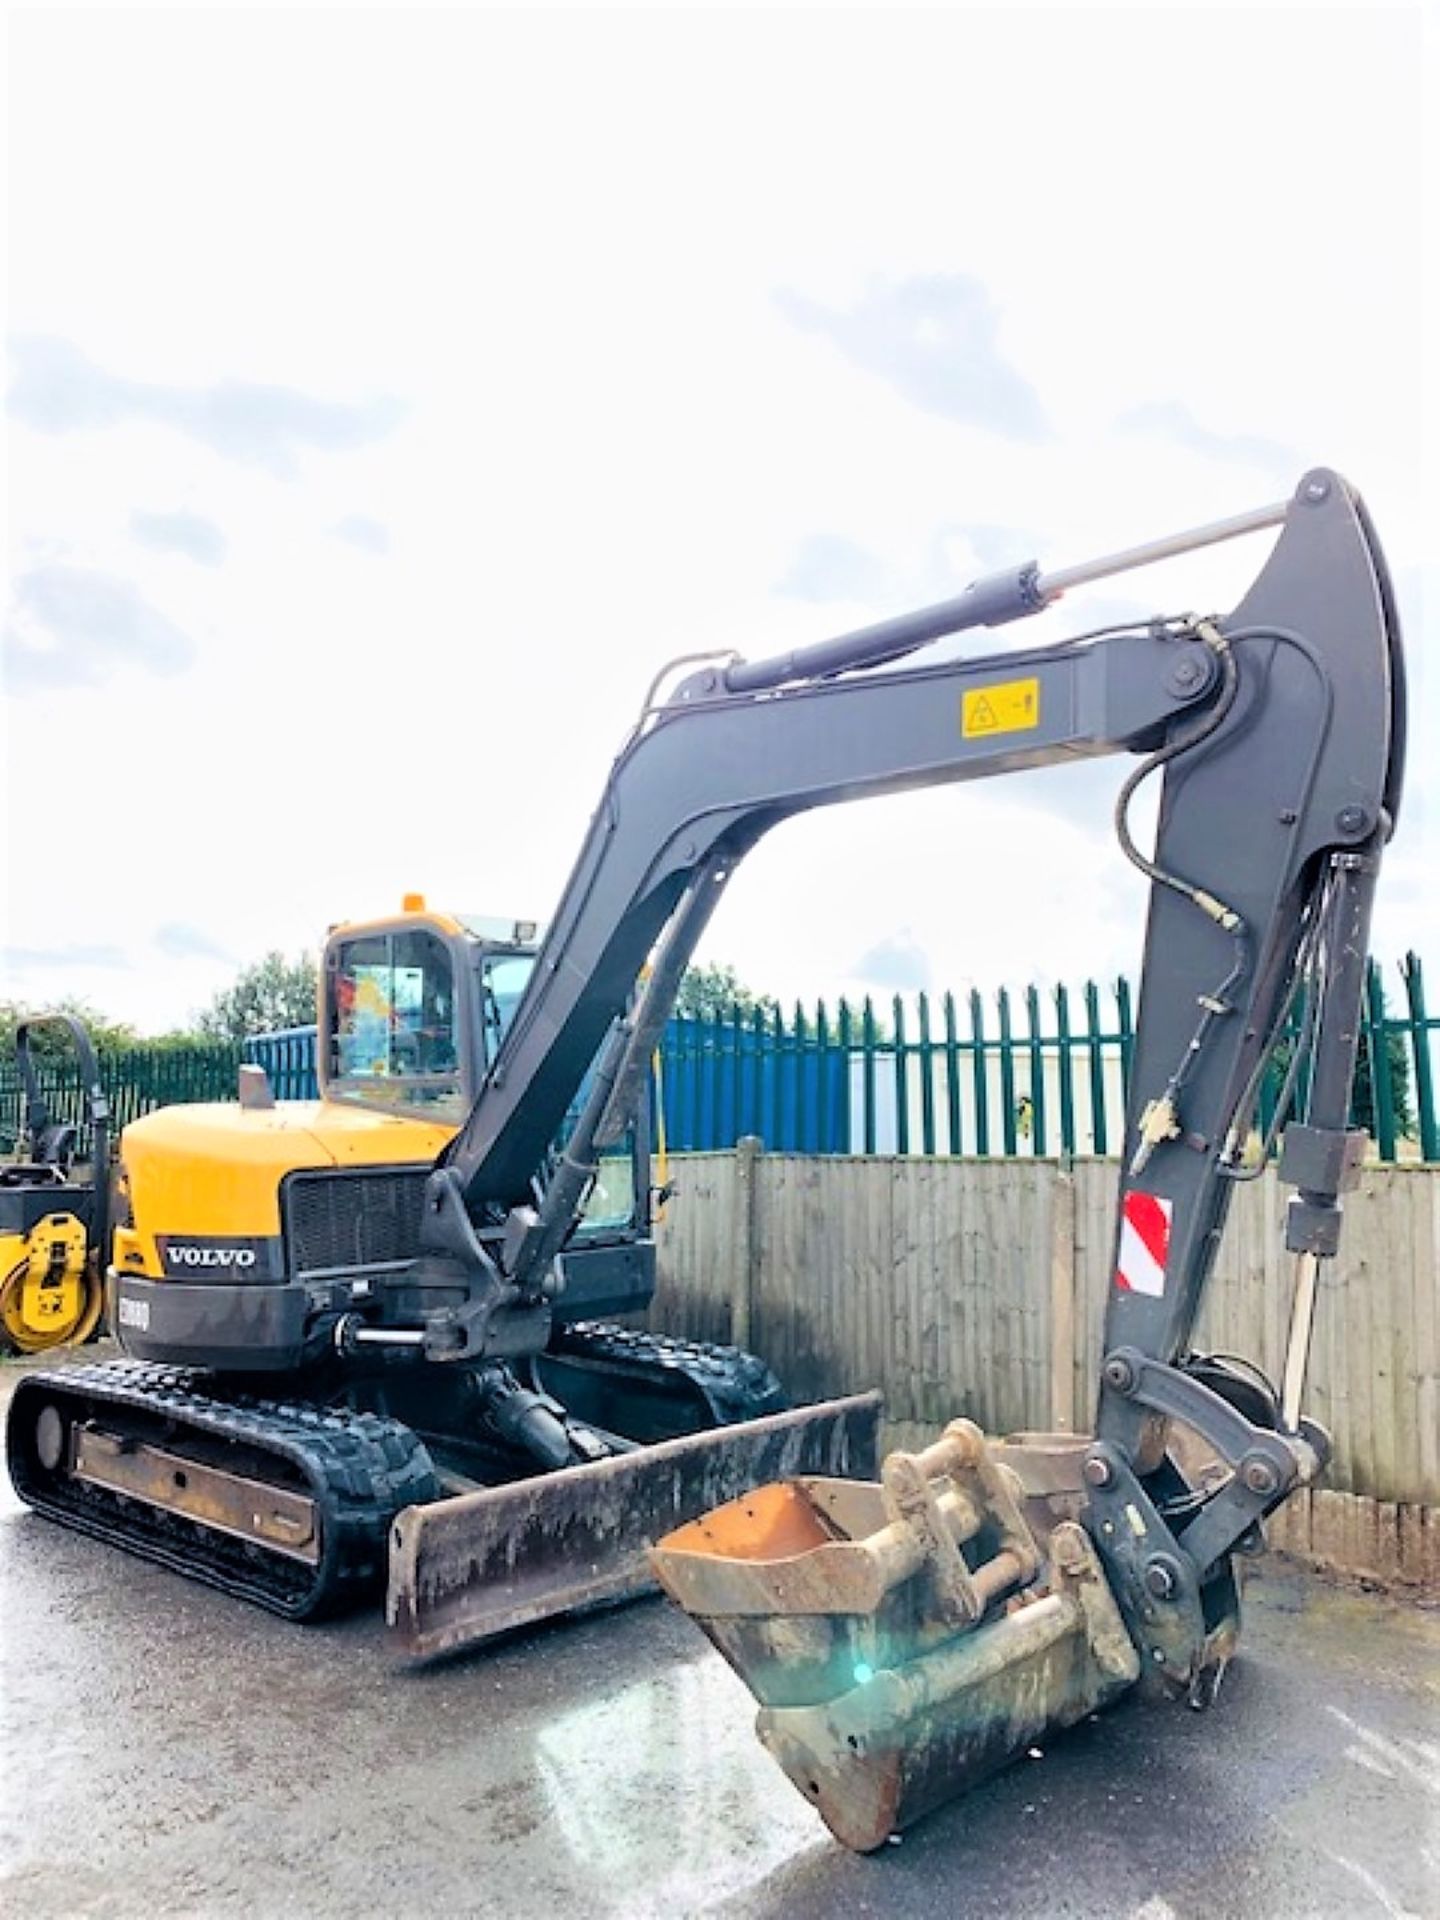 VOLVO ECR88D RUBBER TRACKED DIGGER / EXCAVATOR, YEAR 2015, 4148 HOURS, 3 X BUCKETS, AIR CON, RADIO - Image 5 of 17